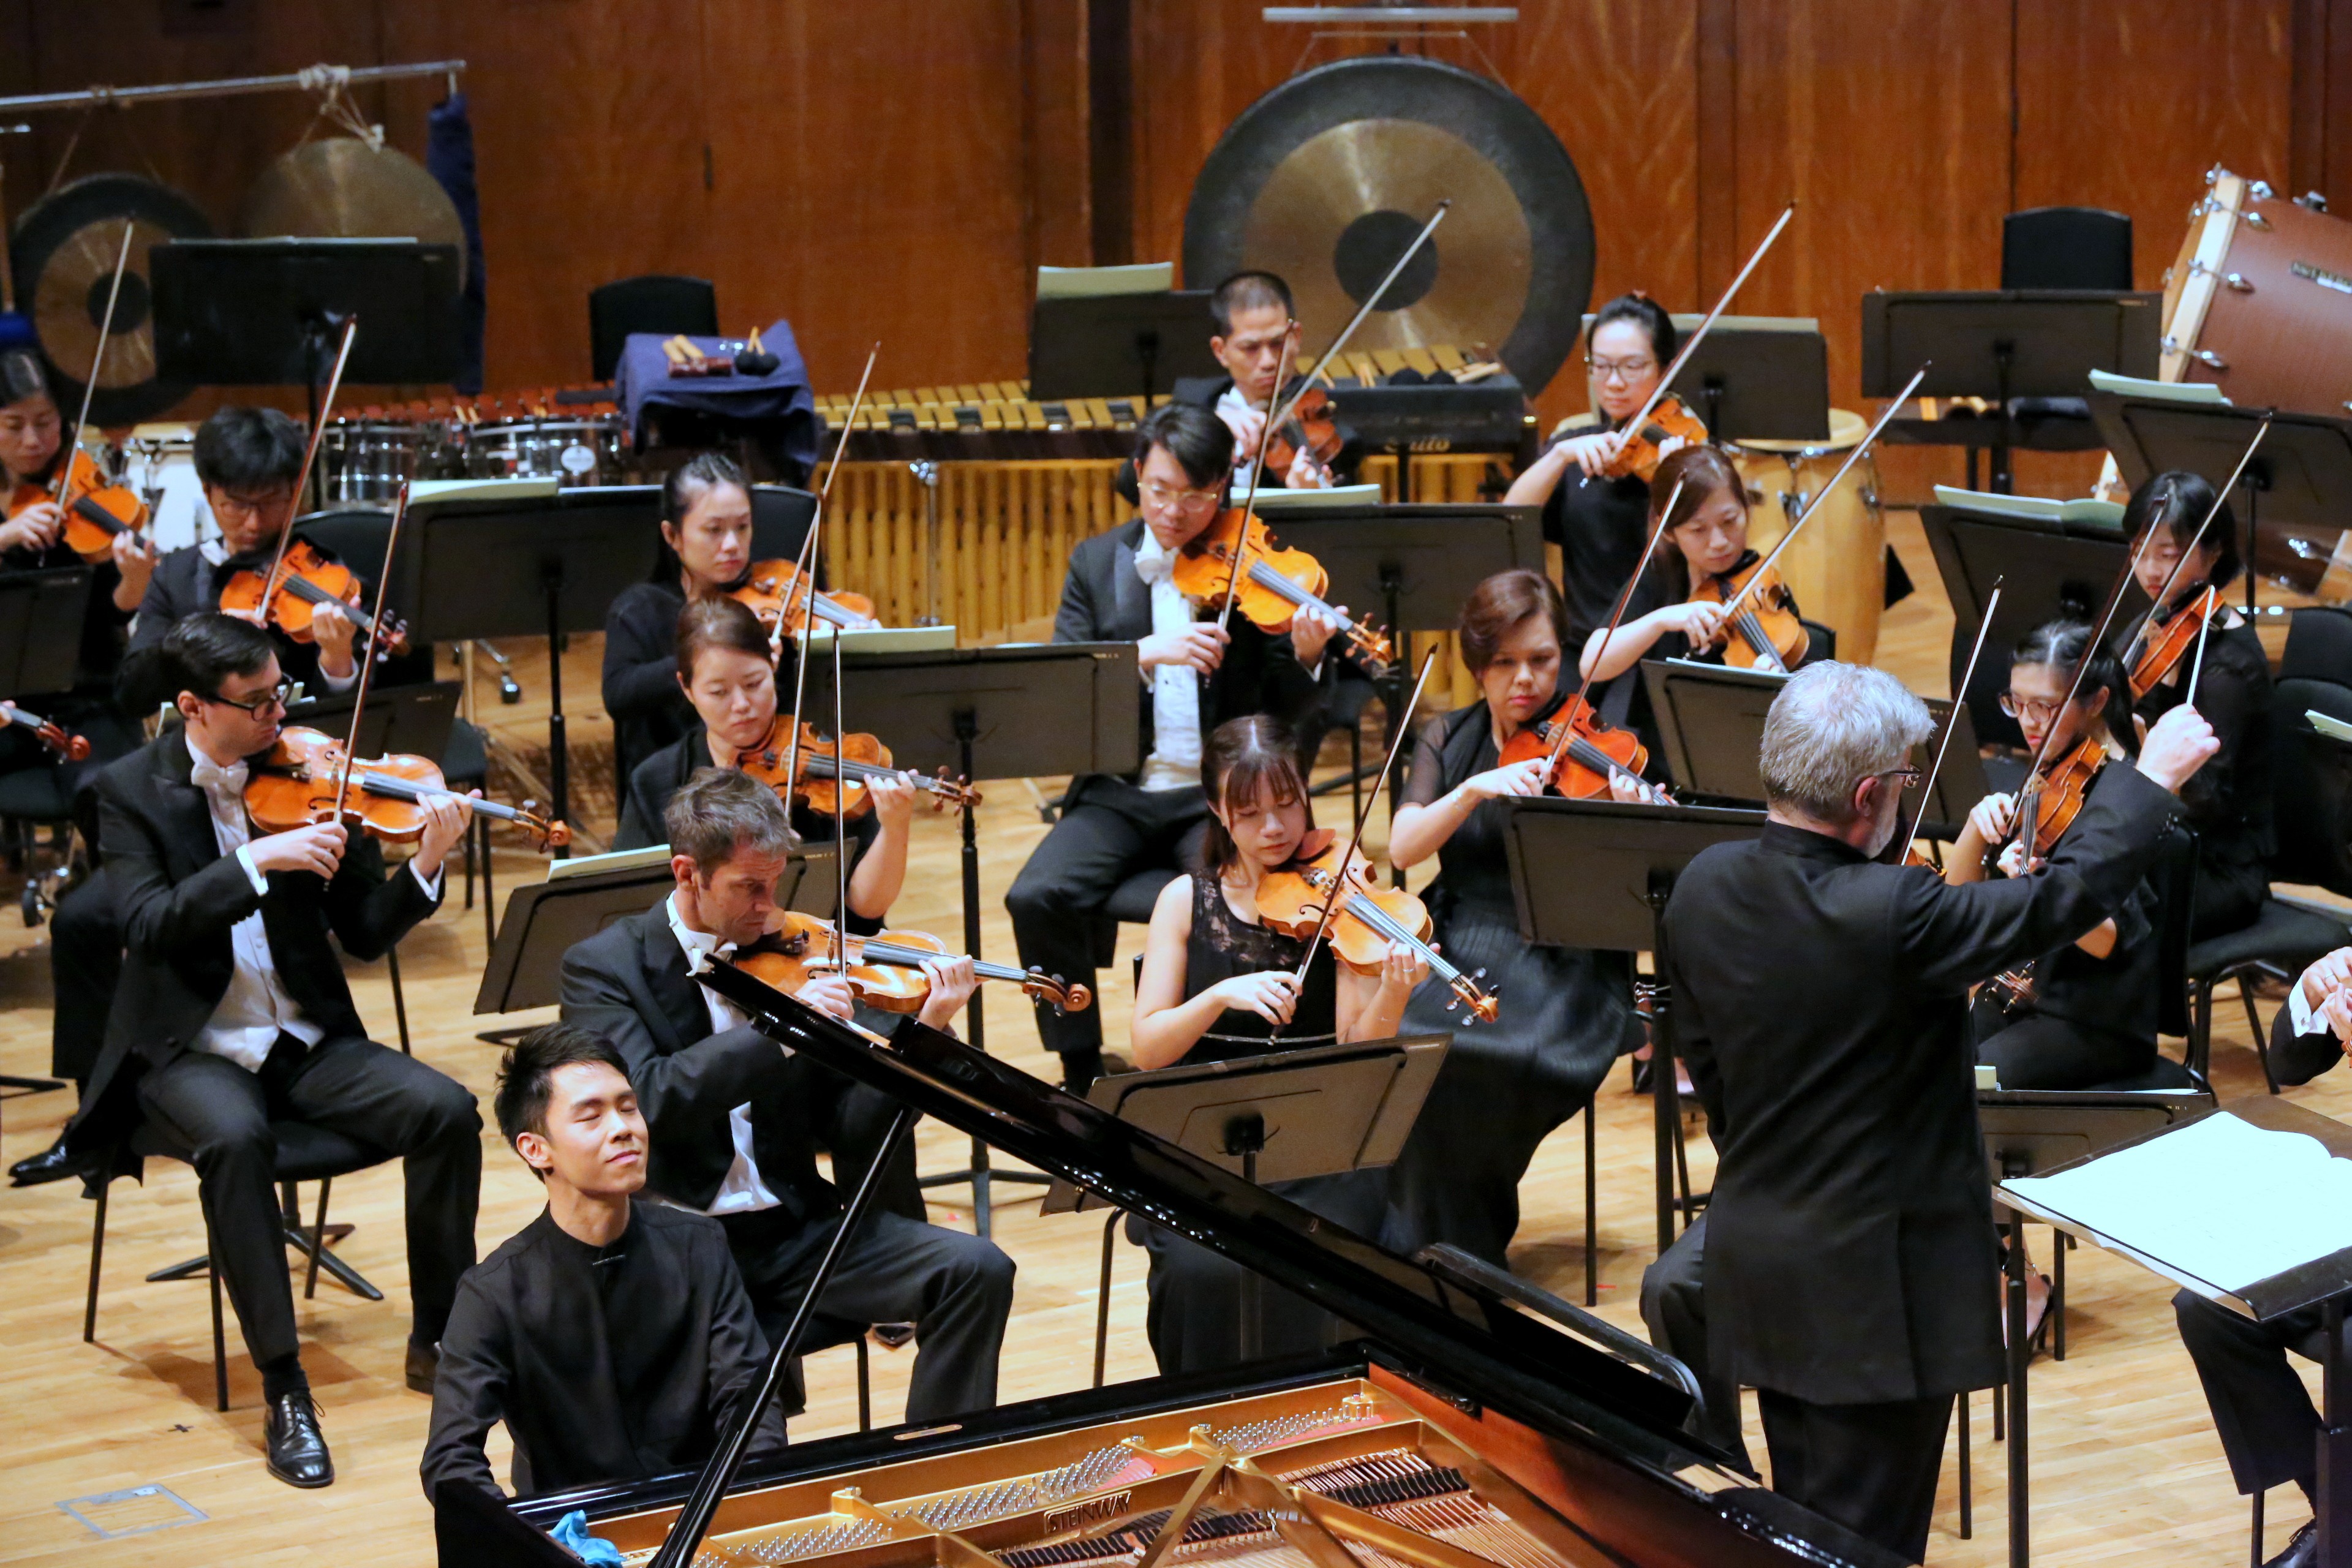 American soloist, performing with Hong Kong Sinfonietta, played Russian’s first concerto too cautiously but brought out the romanticism of his second